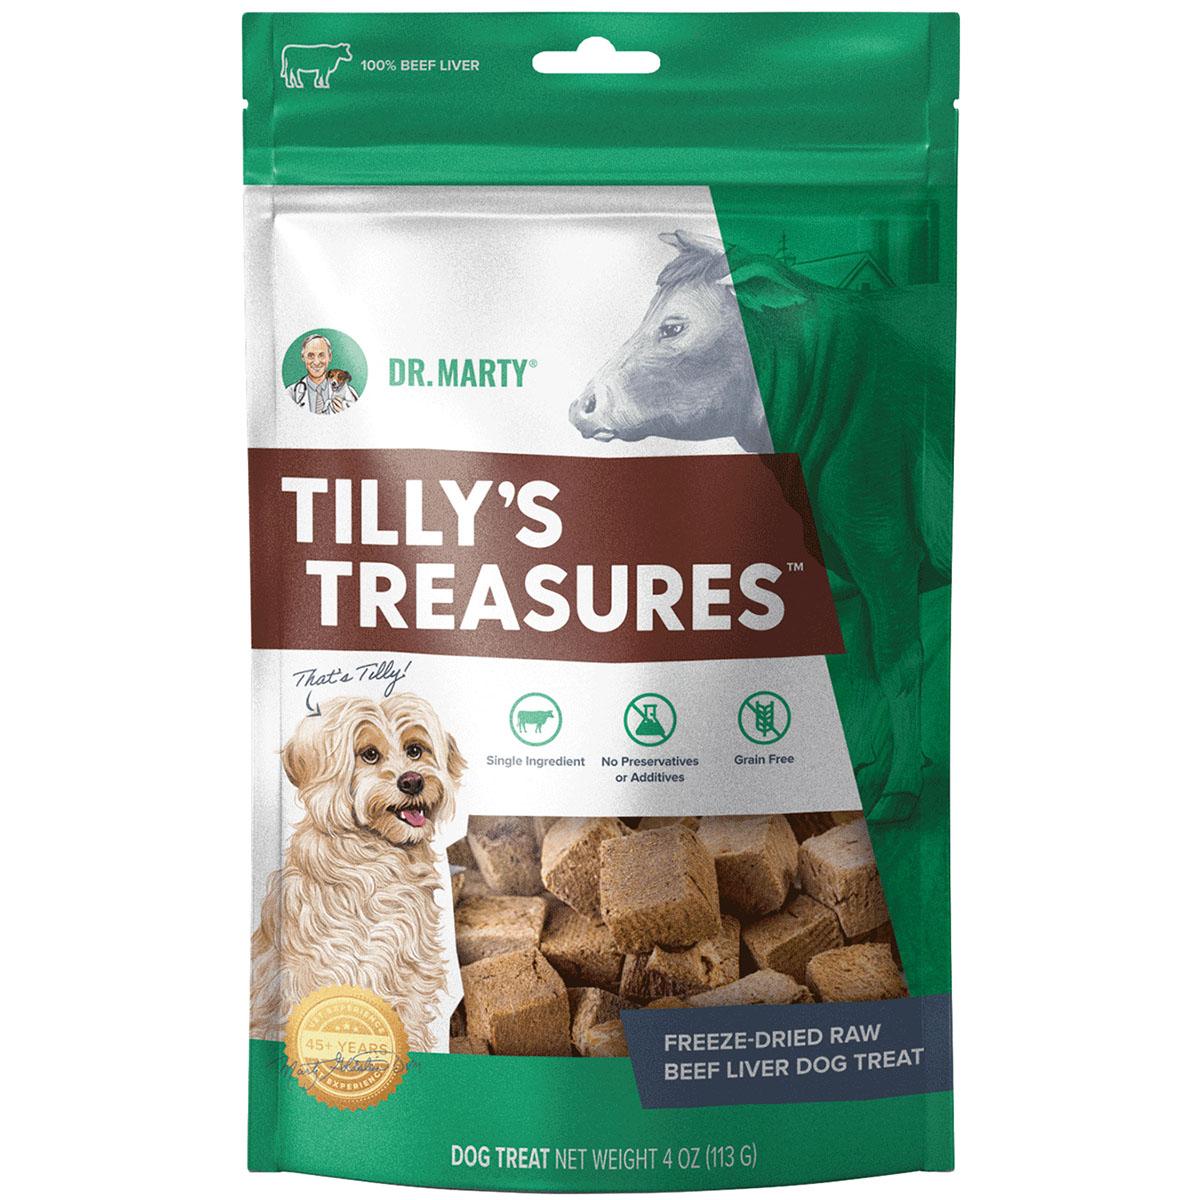 dr-marty-tillys-treasures-freeze-dried-beef-liver-dog-treats-